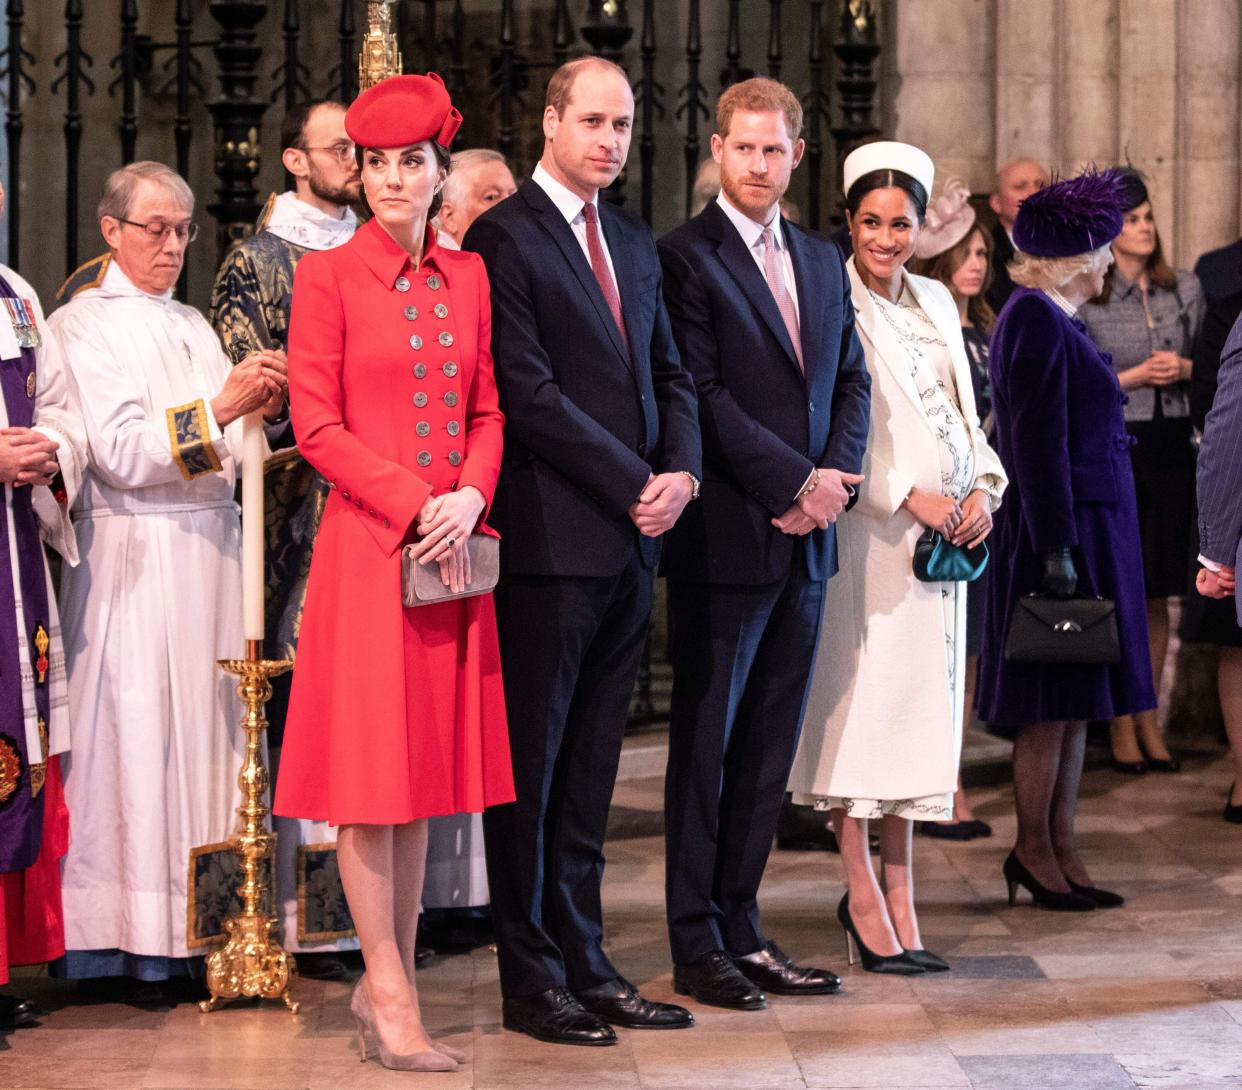 There's been a few schedule clashes between the royal families Photo: Getty Images